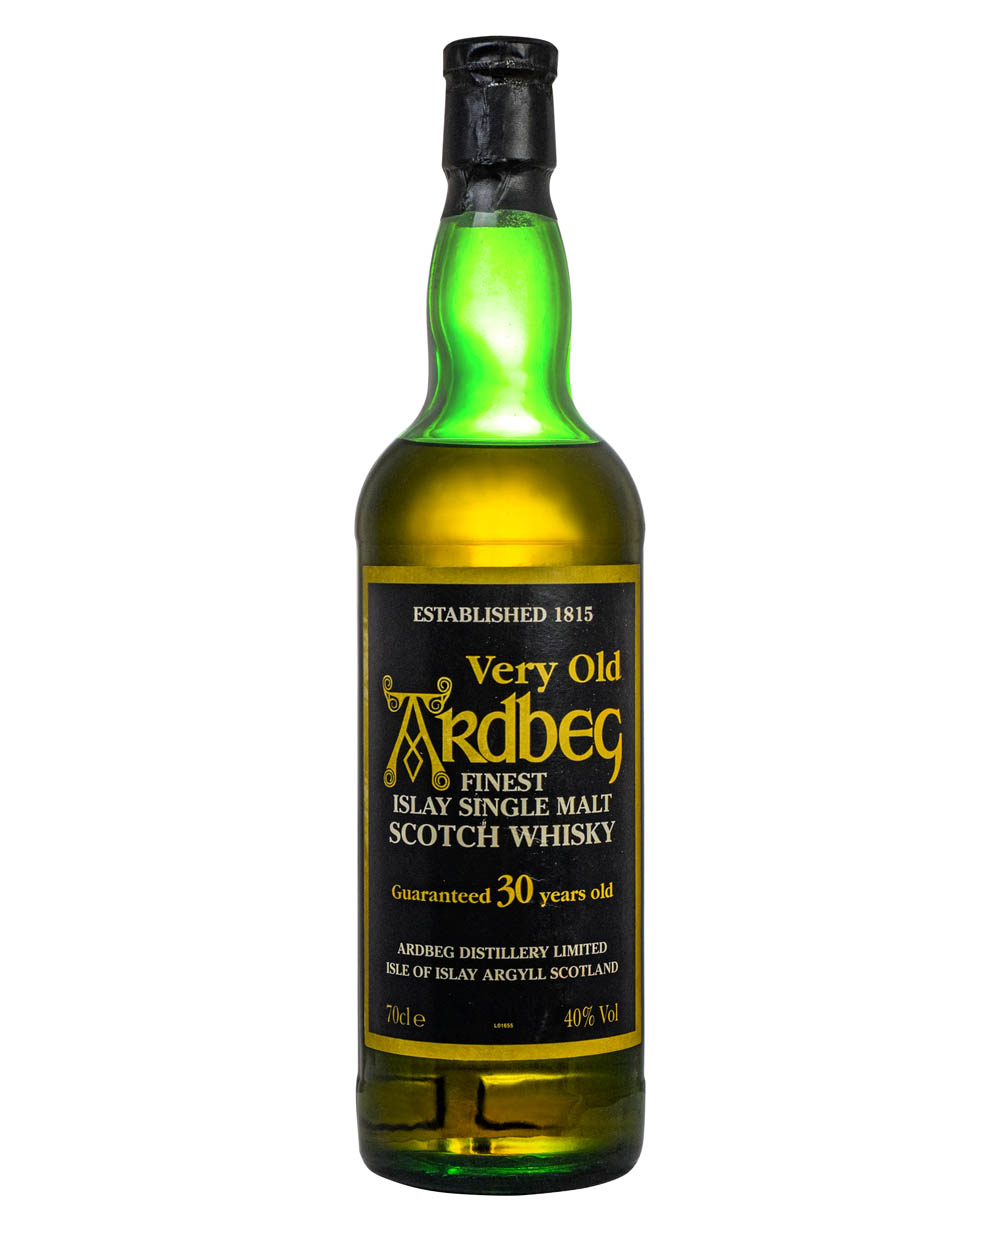 Ardbeg 30 Years Old Very Old 1990s Must Have Malts MHM